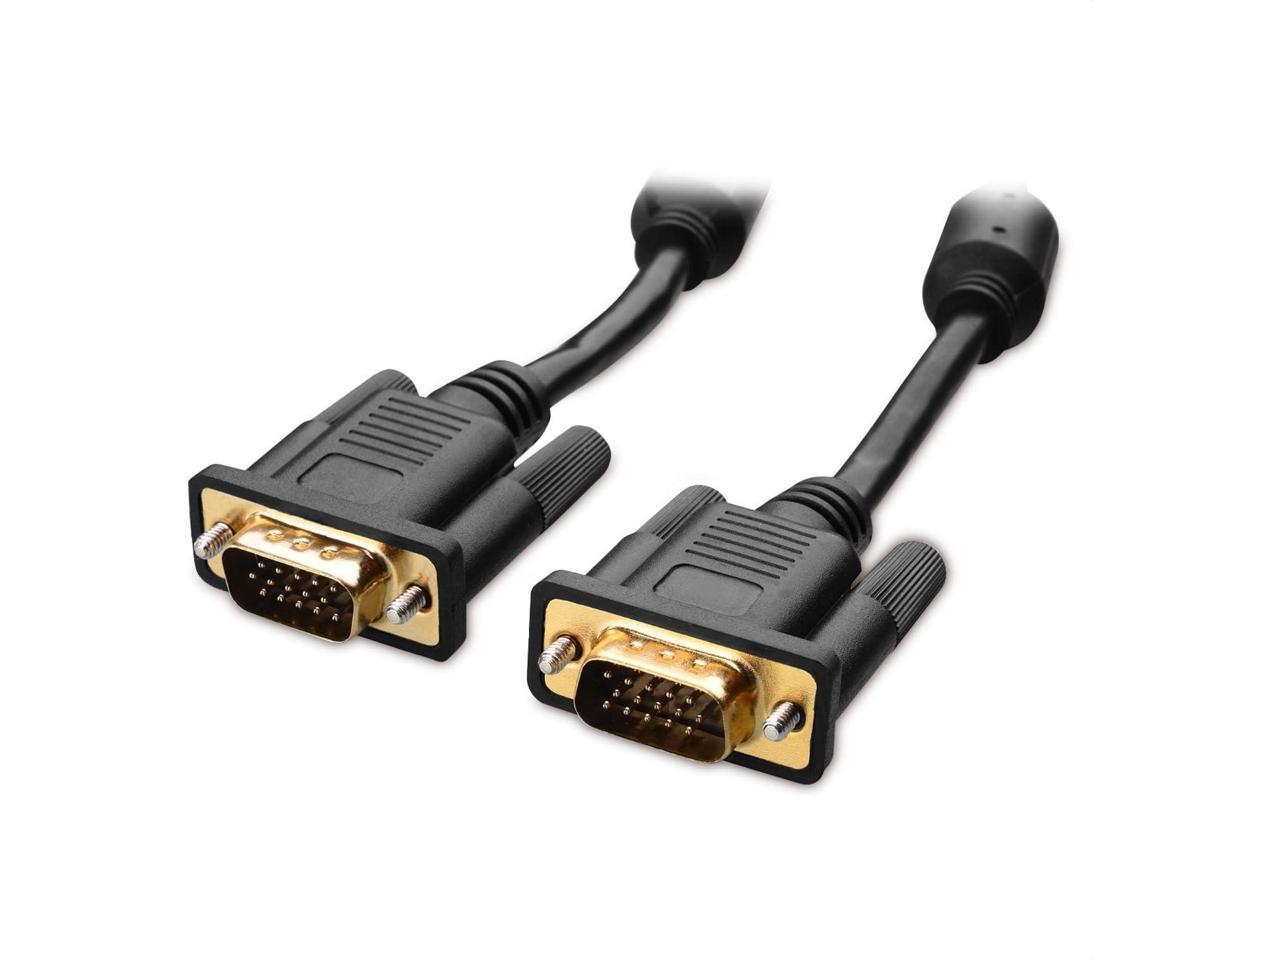 Tainston VGA to VGA Cable HD15 Monitor Cable with Ferrites Male to Male-75 Feet 